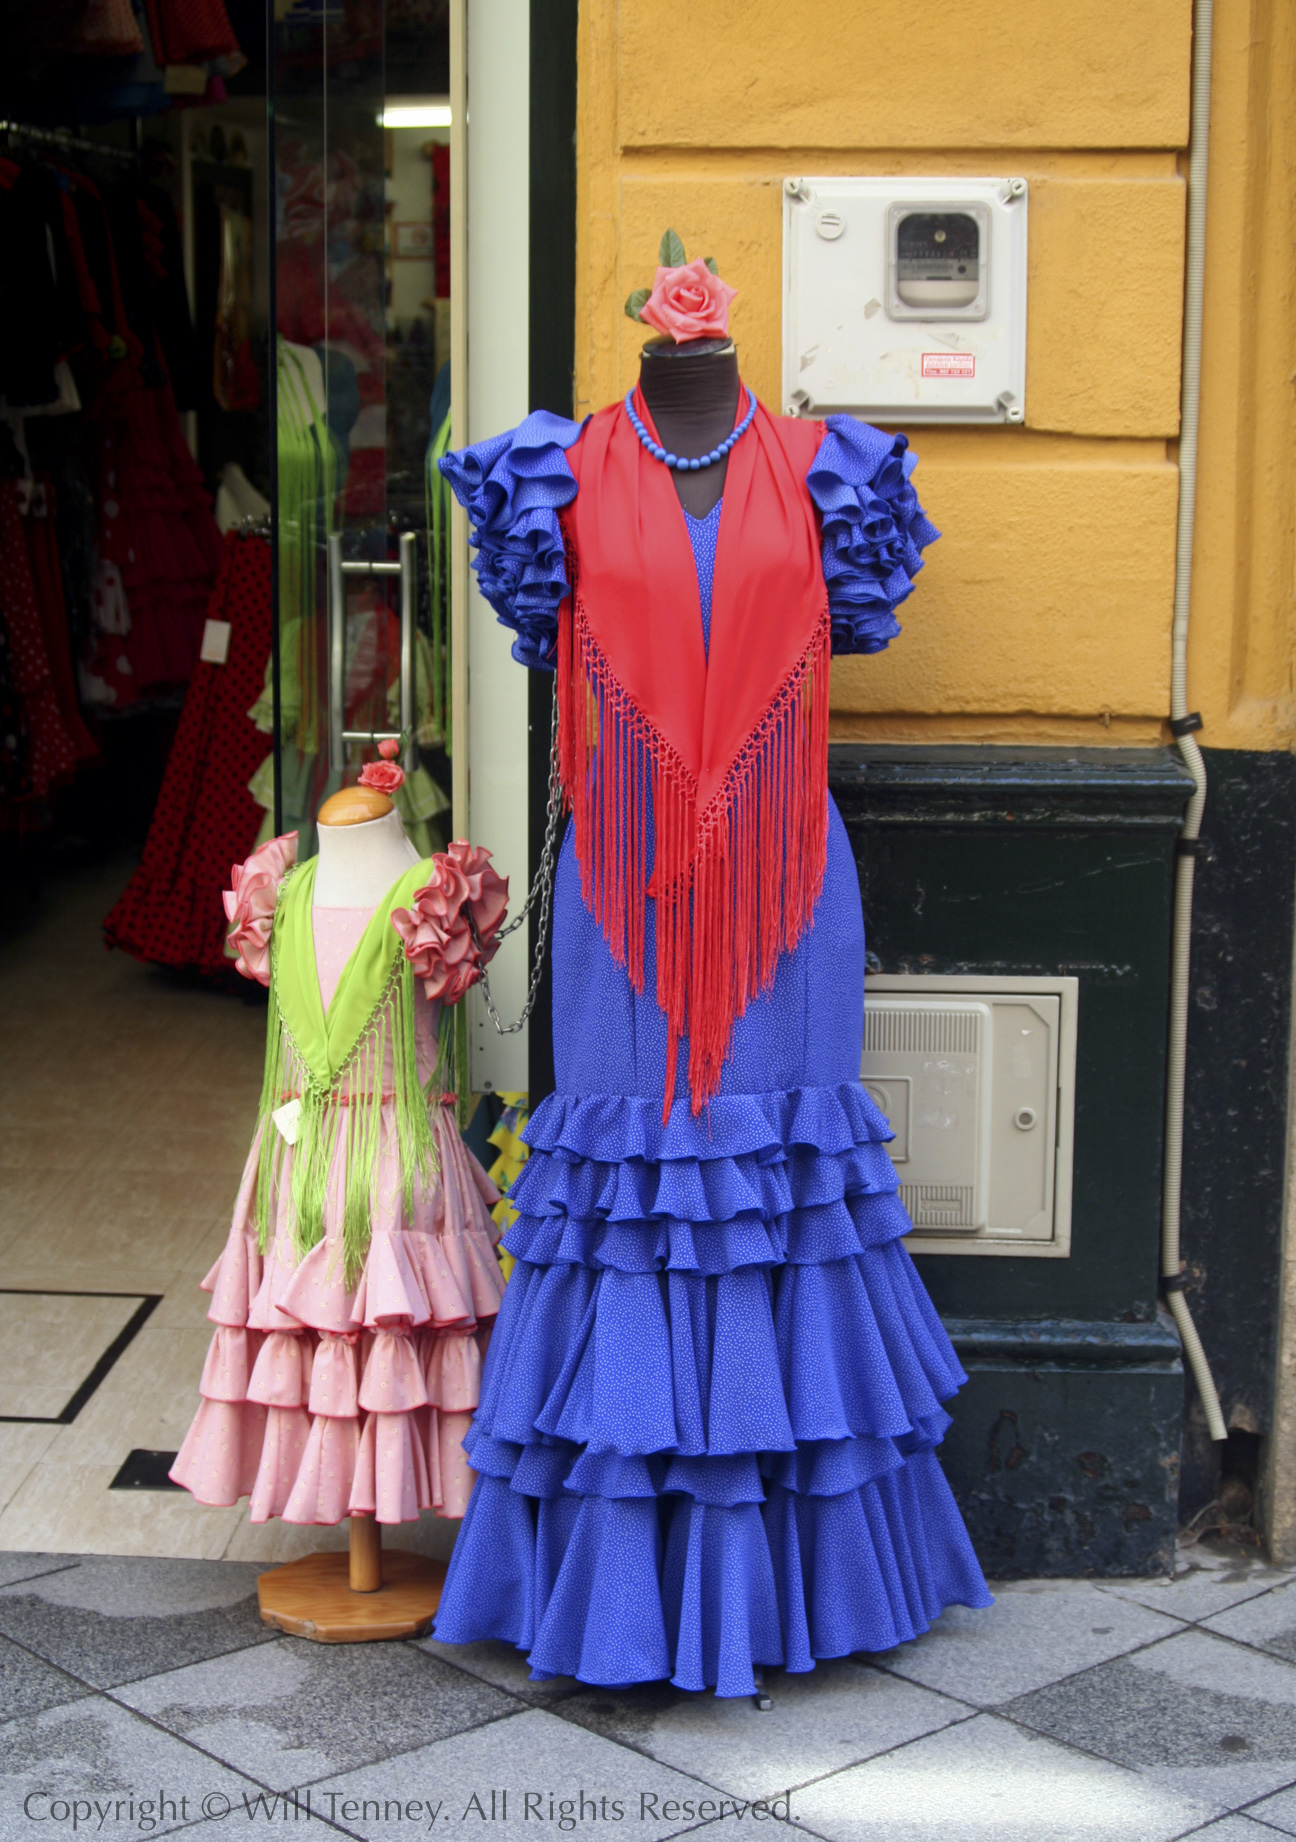 Flamenco Store: Photograph by Will Tenney